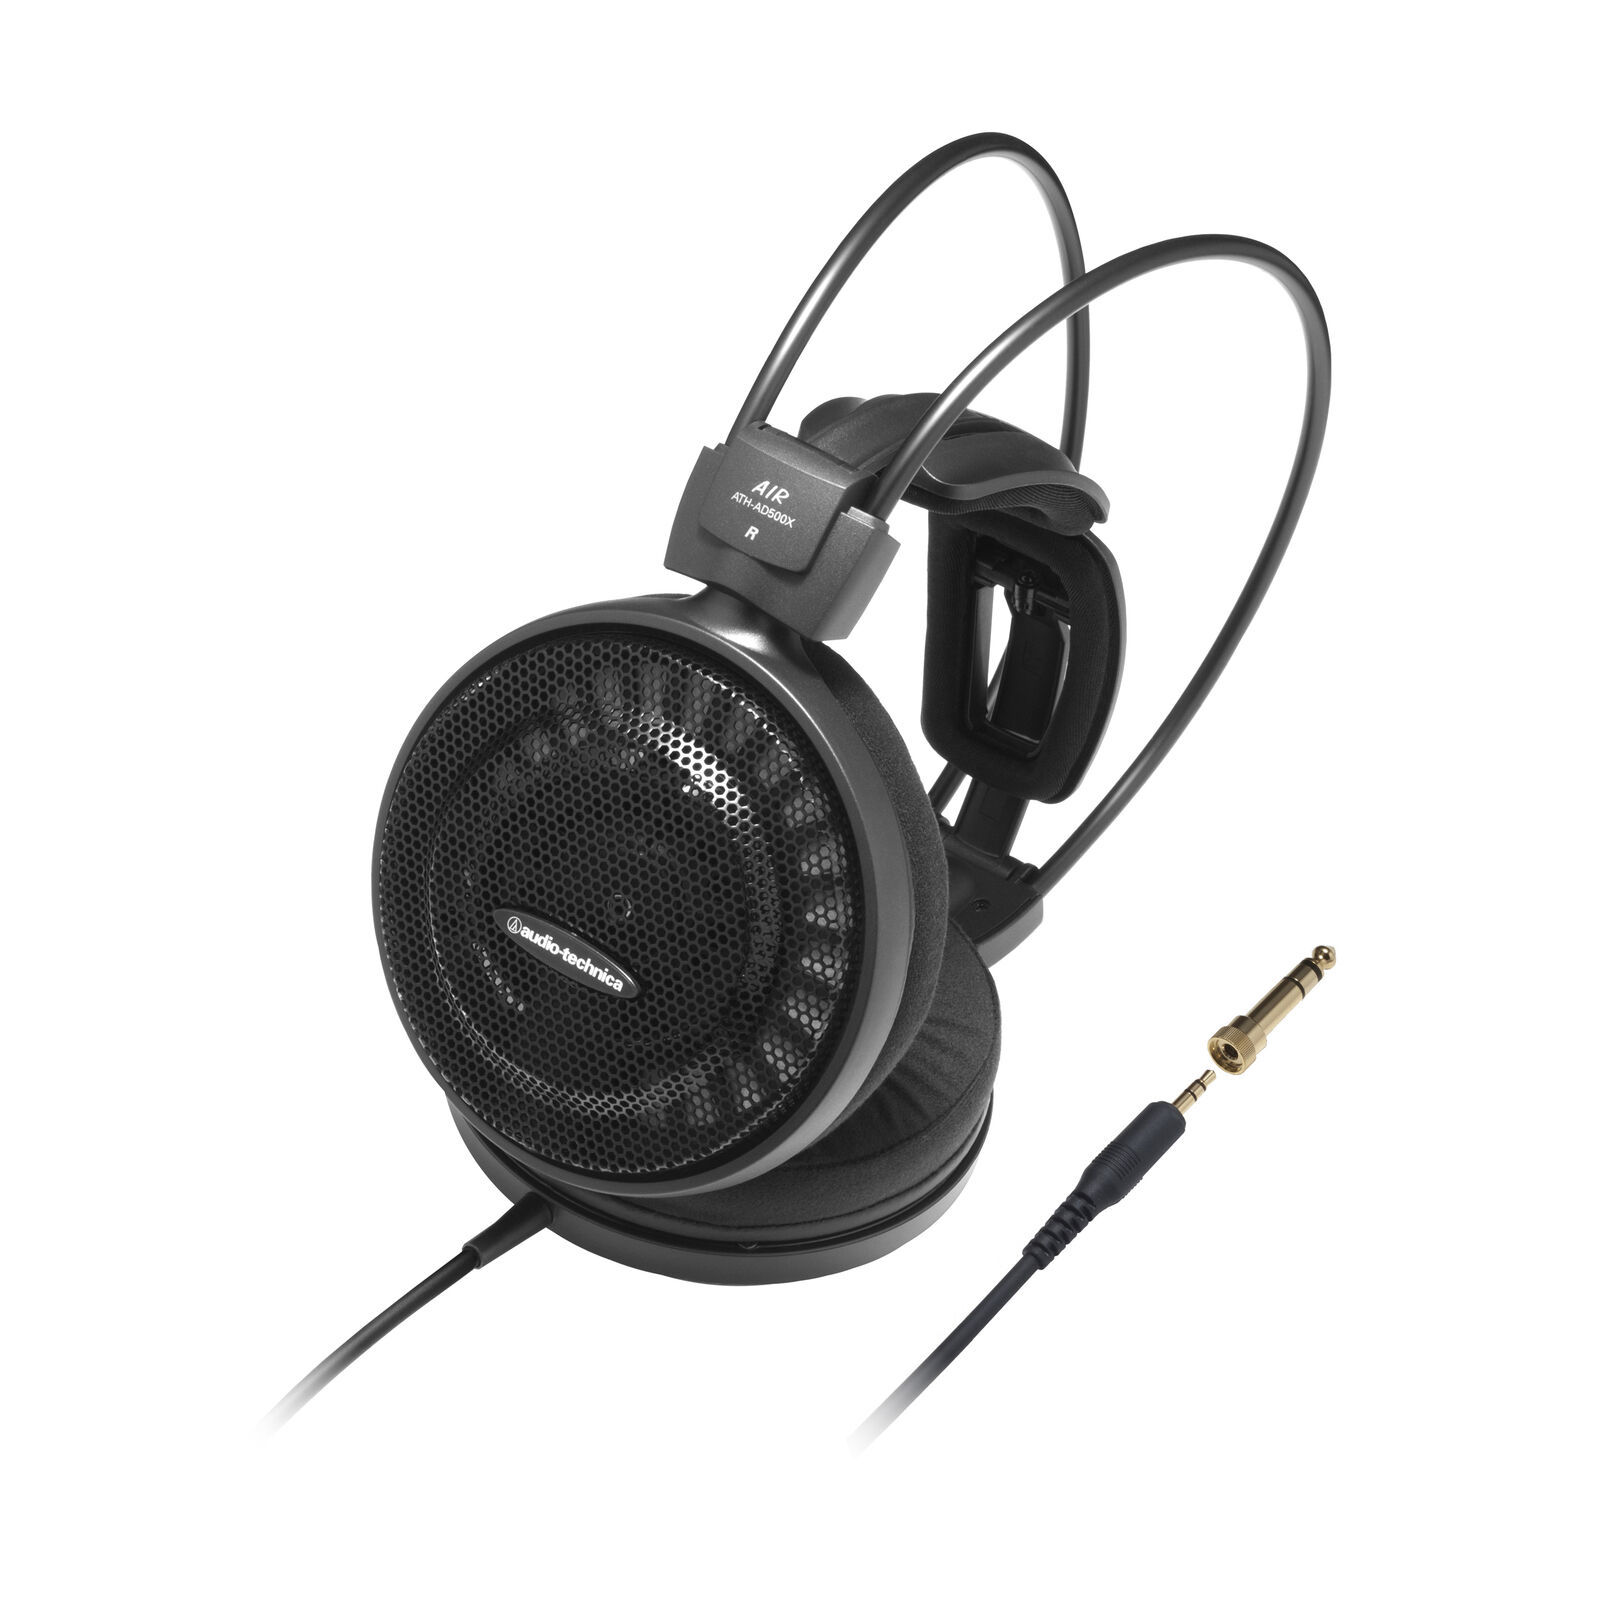 Primary image for Audio Technica Audiophile Open-Back Wired Open-Air Headphones ATH-AD500X